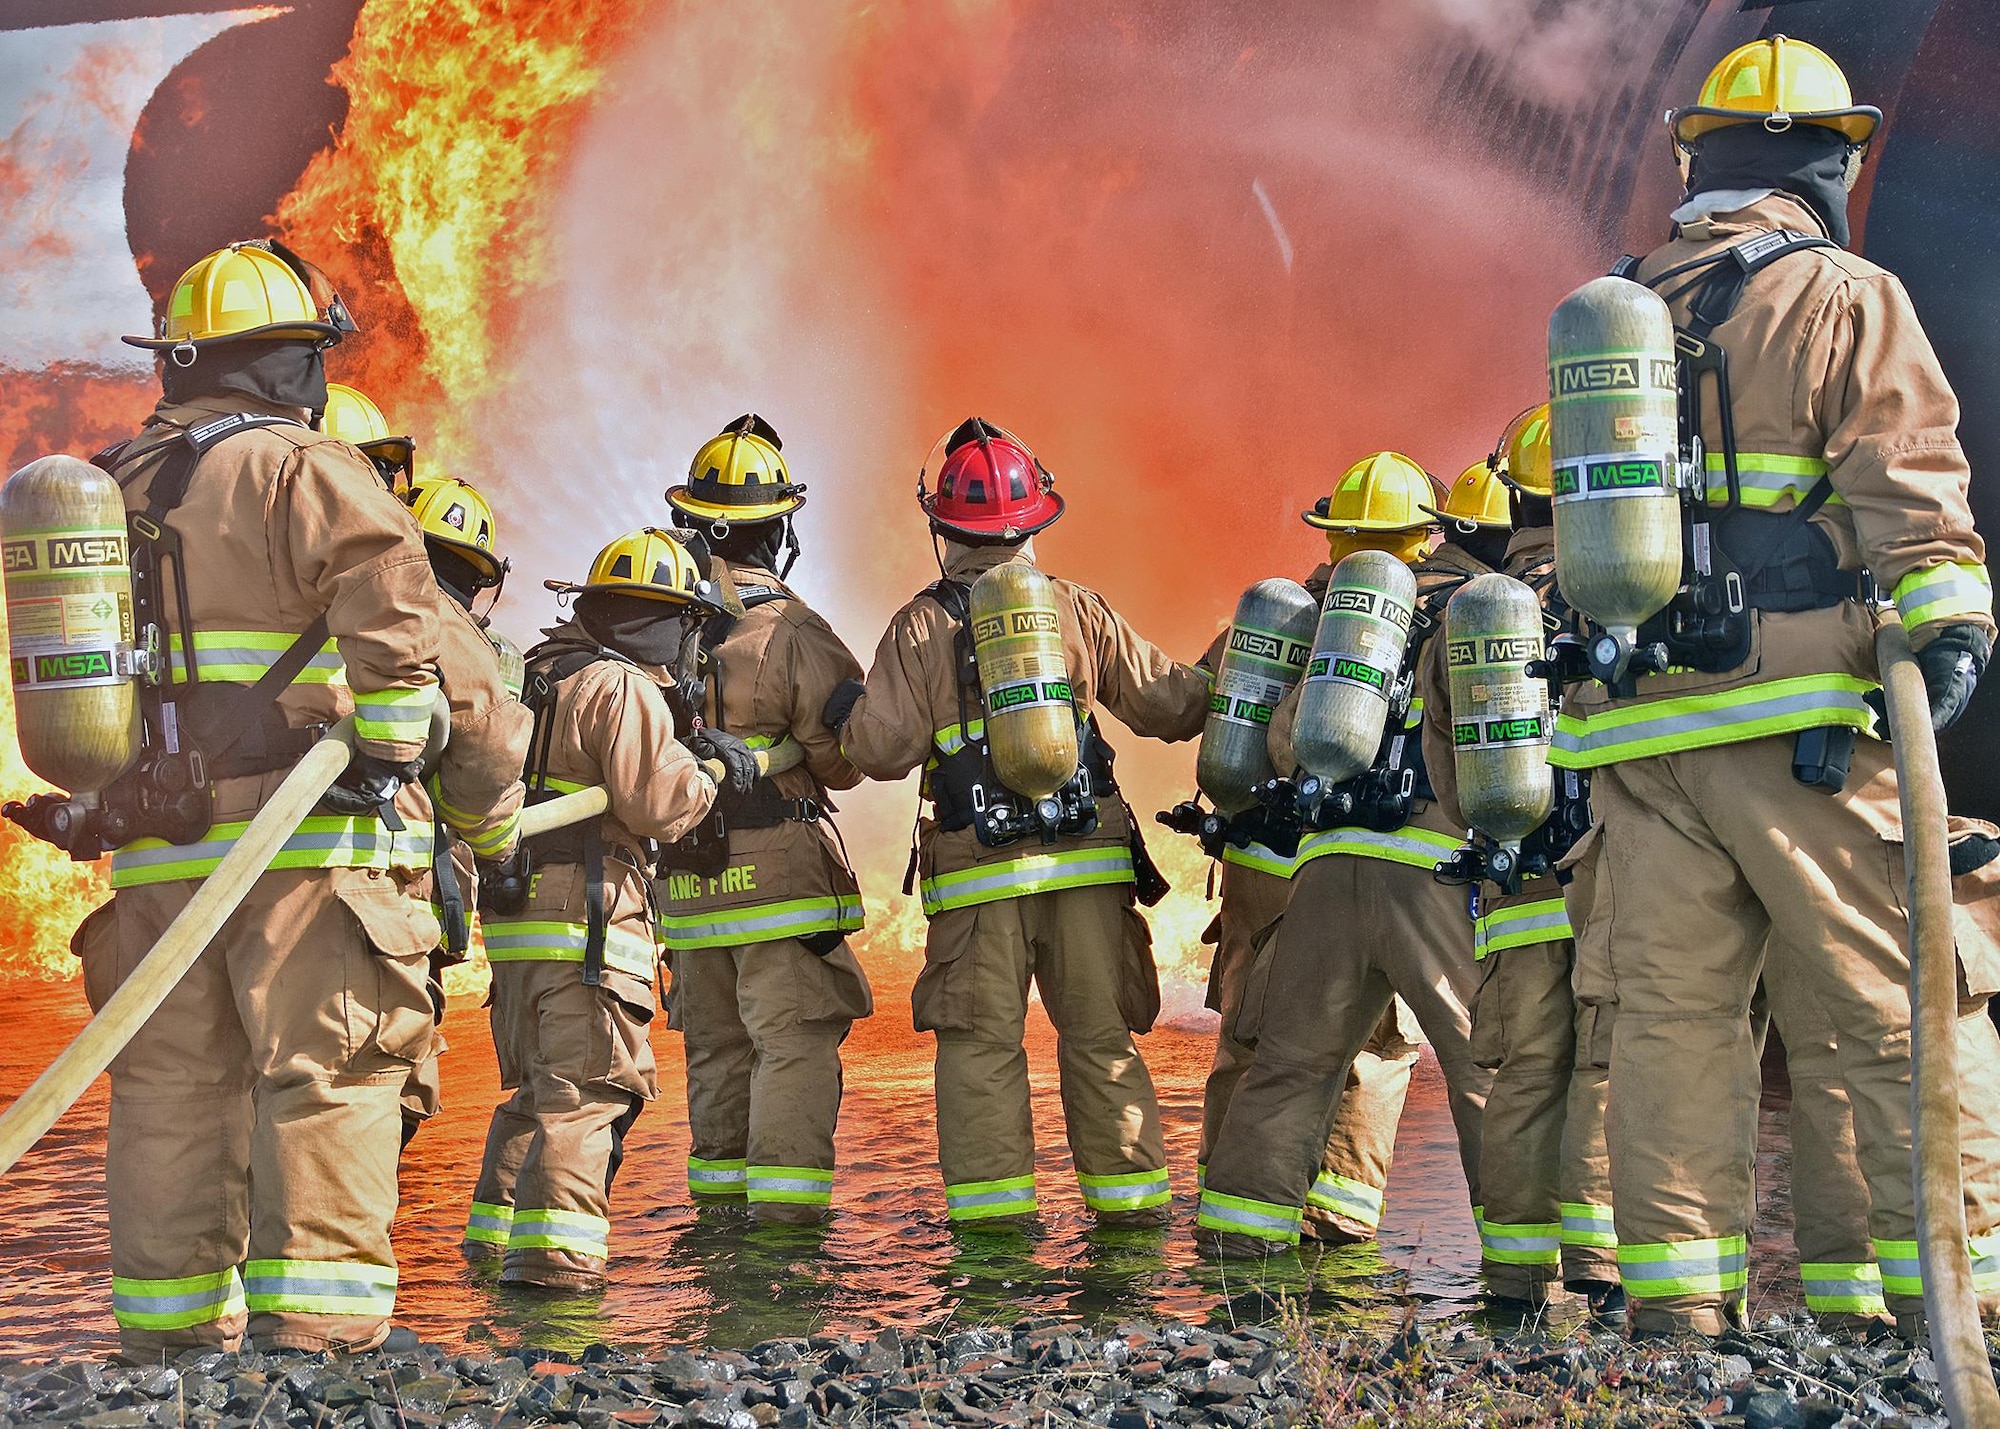 Military and Civilian members of the Quonset Fire Department from the 143d Airlift Wing, Rhode Island Air National Guard conduct live fire training at Westover Air Reserve Base, Chicopee, Massachusetts, September 29, 2016. The live fire training is part of annual qualification requirements and allows military and civilians to train in collaboration. US Air National Guard Photo by Master Sgt Janeen Miller